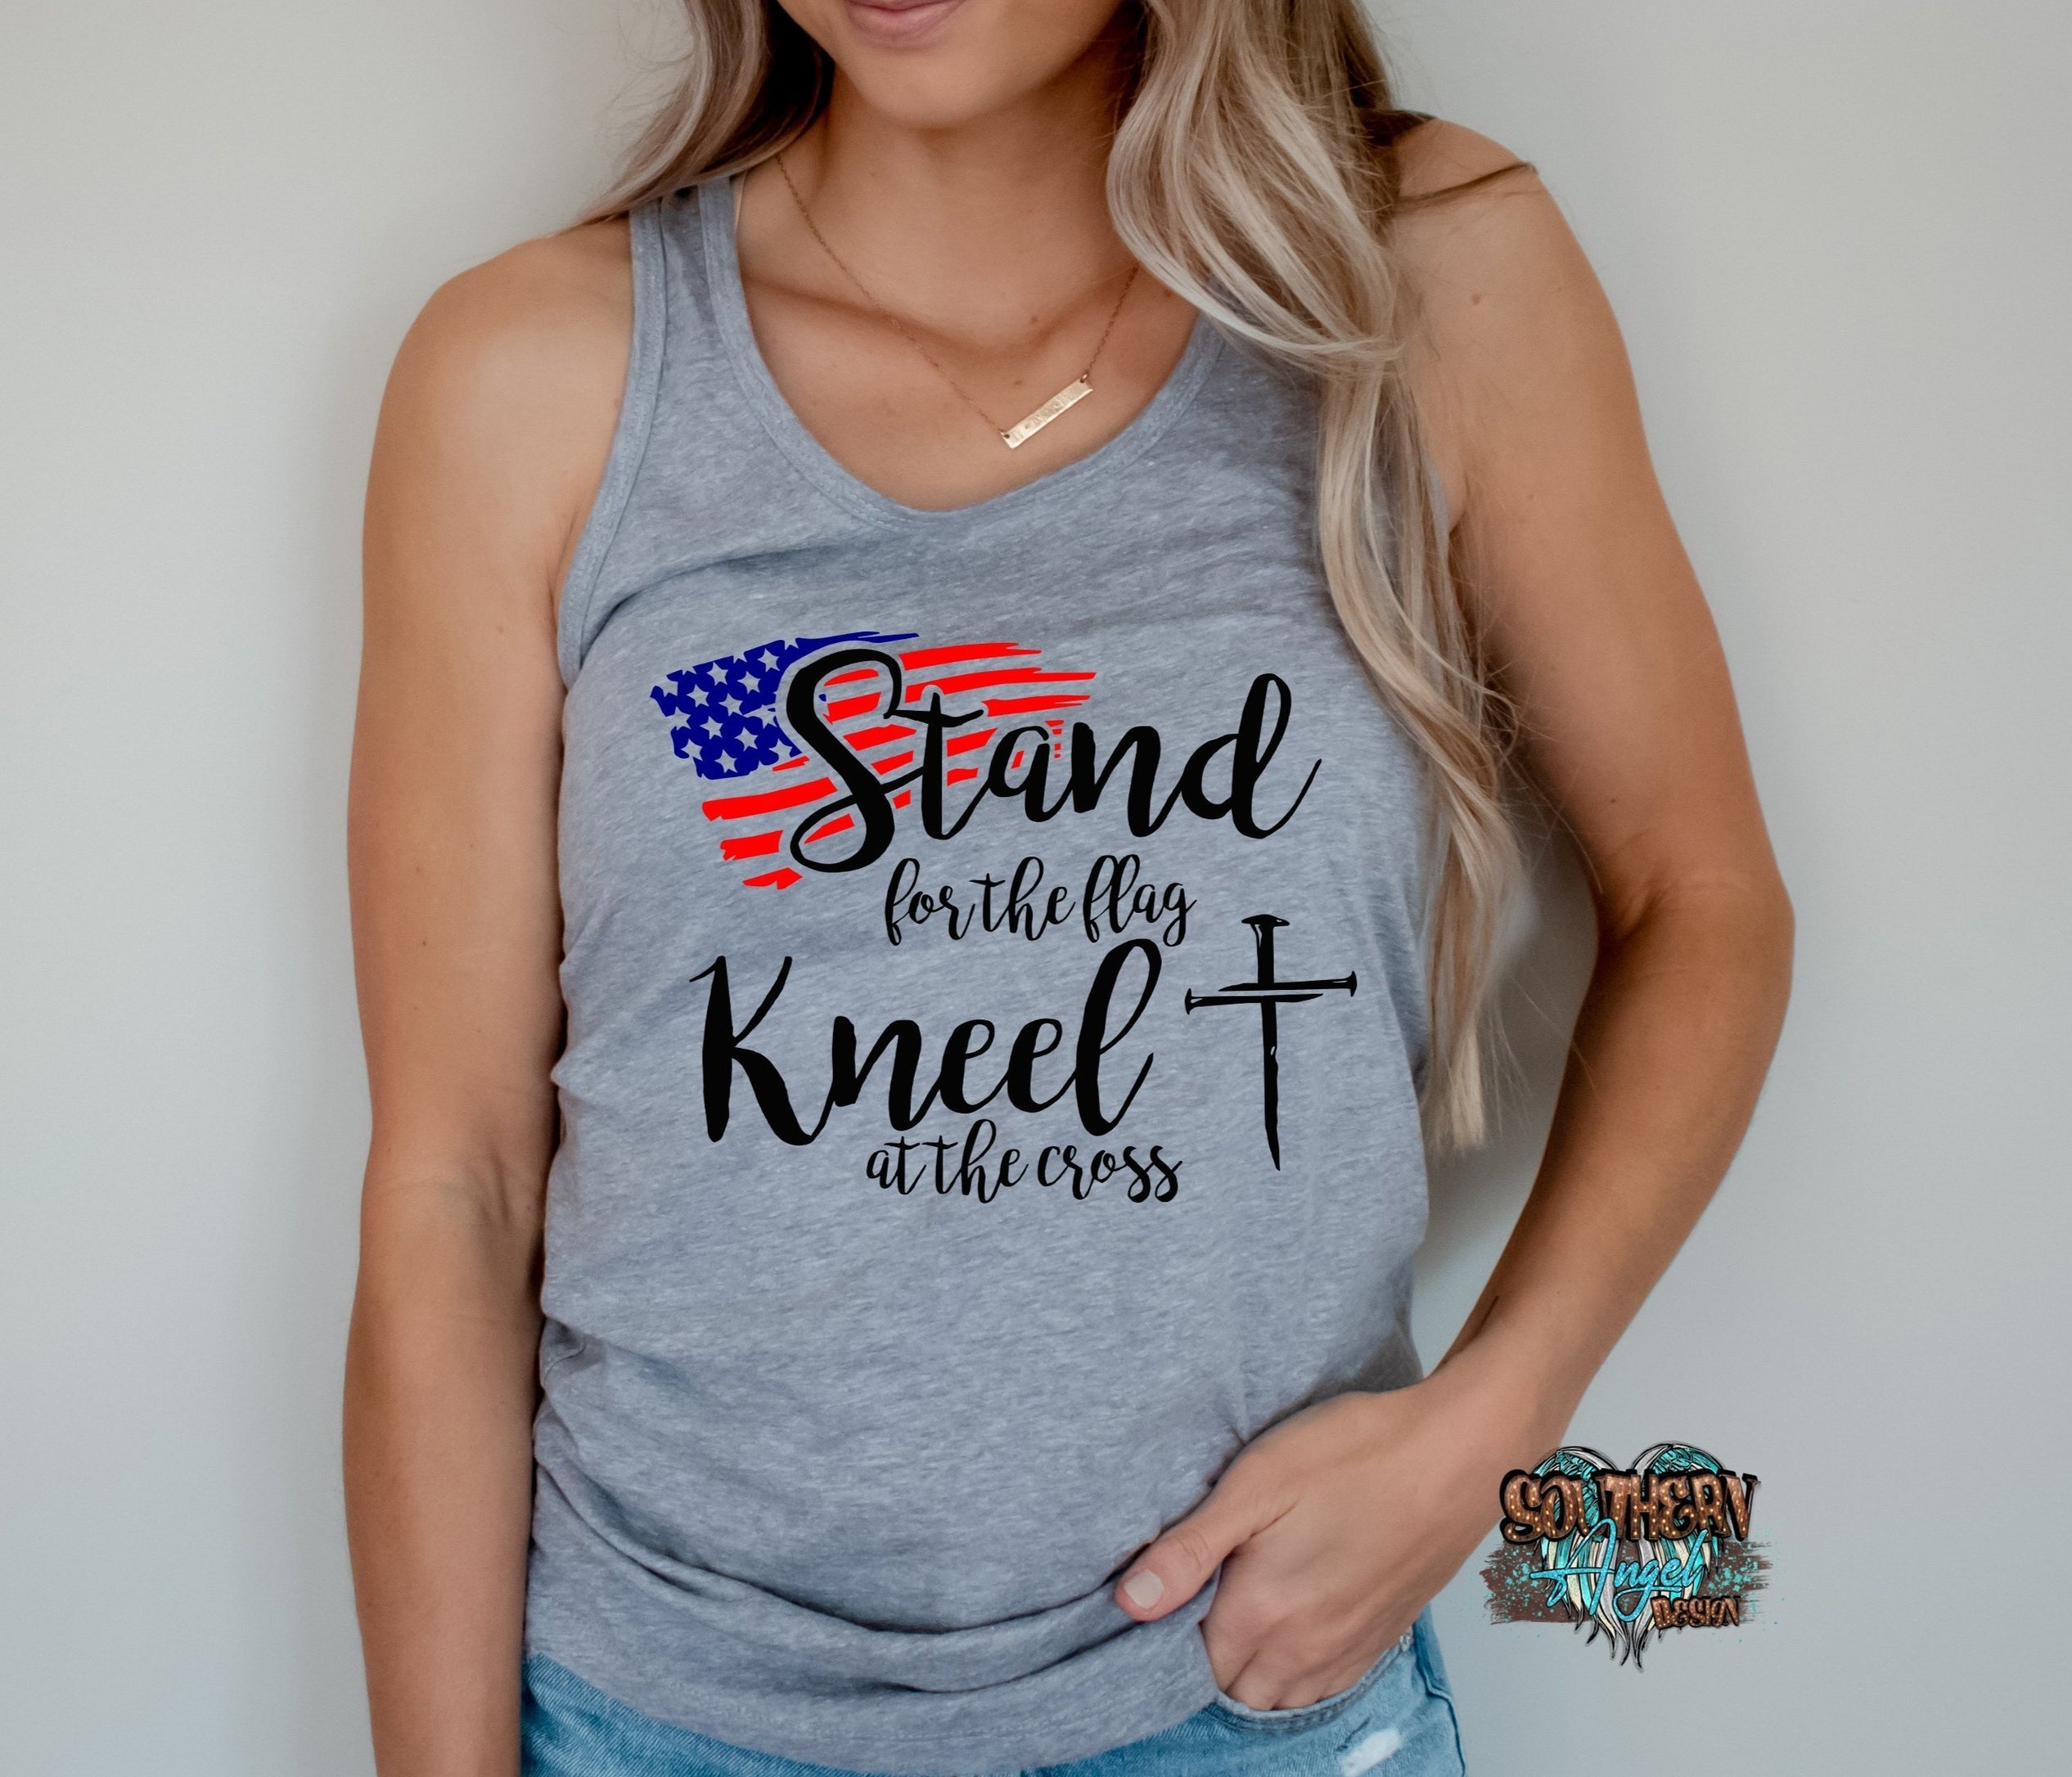 Dark Gray Stand for the Flag Kneel at the Cross image_621ff427-f1da-422d-97c3-29004ef8cdda.jpg stand-for-the-flag-kneel-at-the-cross-1 Adult Patriotic